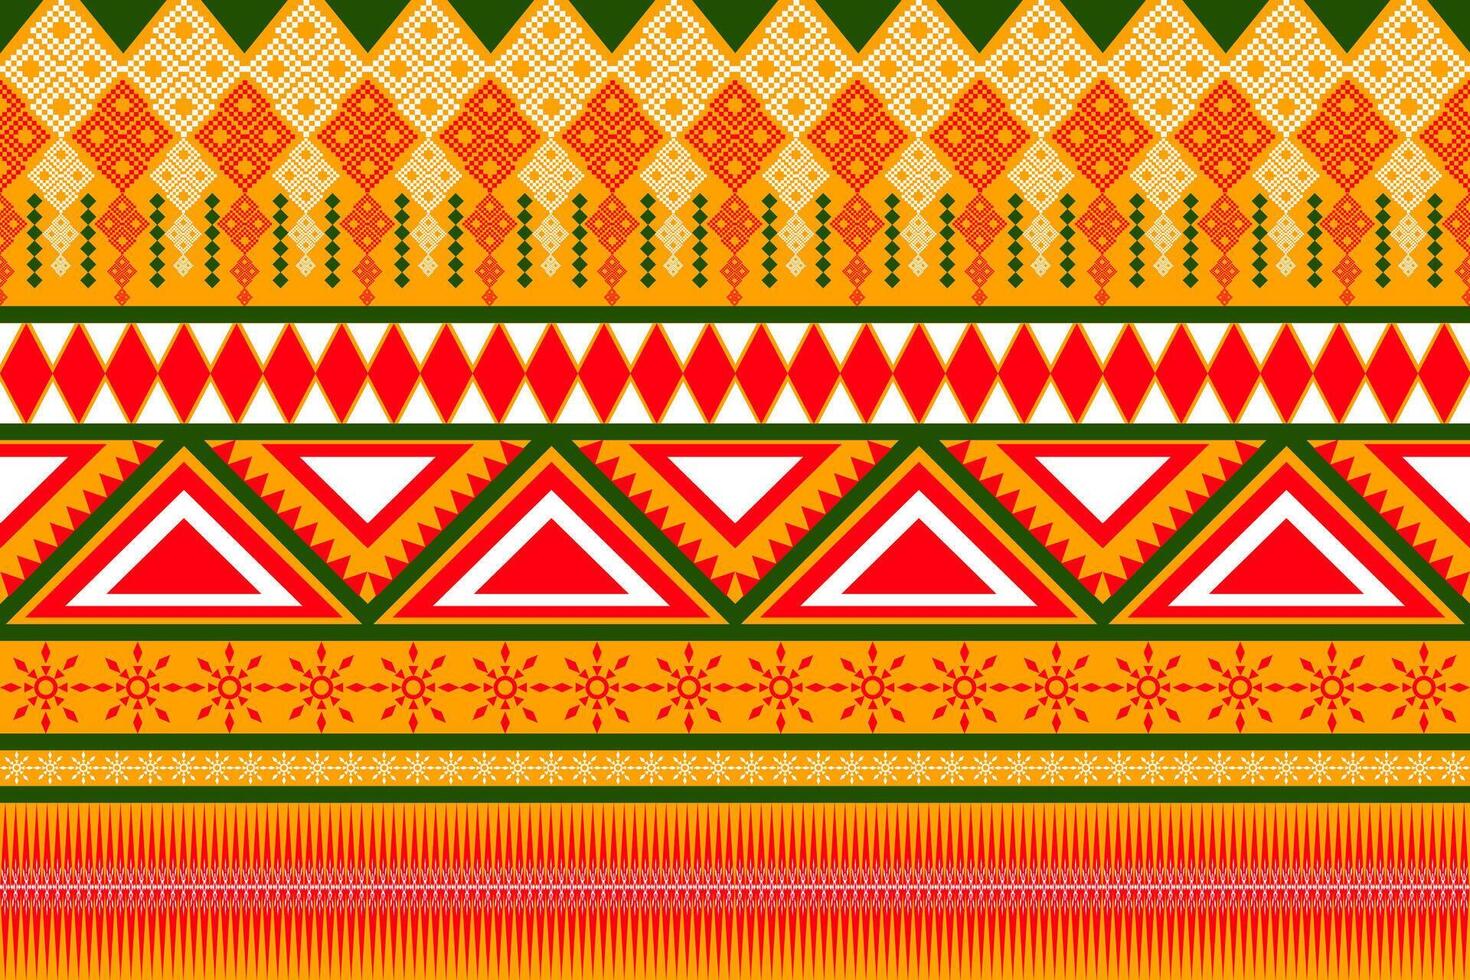 Seamless design pattern, traditional geometric flower zigzag pattern Christmas yellow yellow green white vector illustration design, abstract fabric pattern, aztec style for print textiles